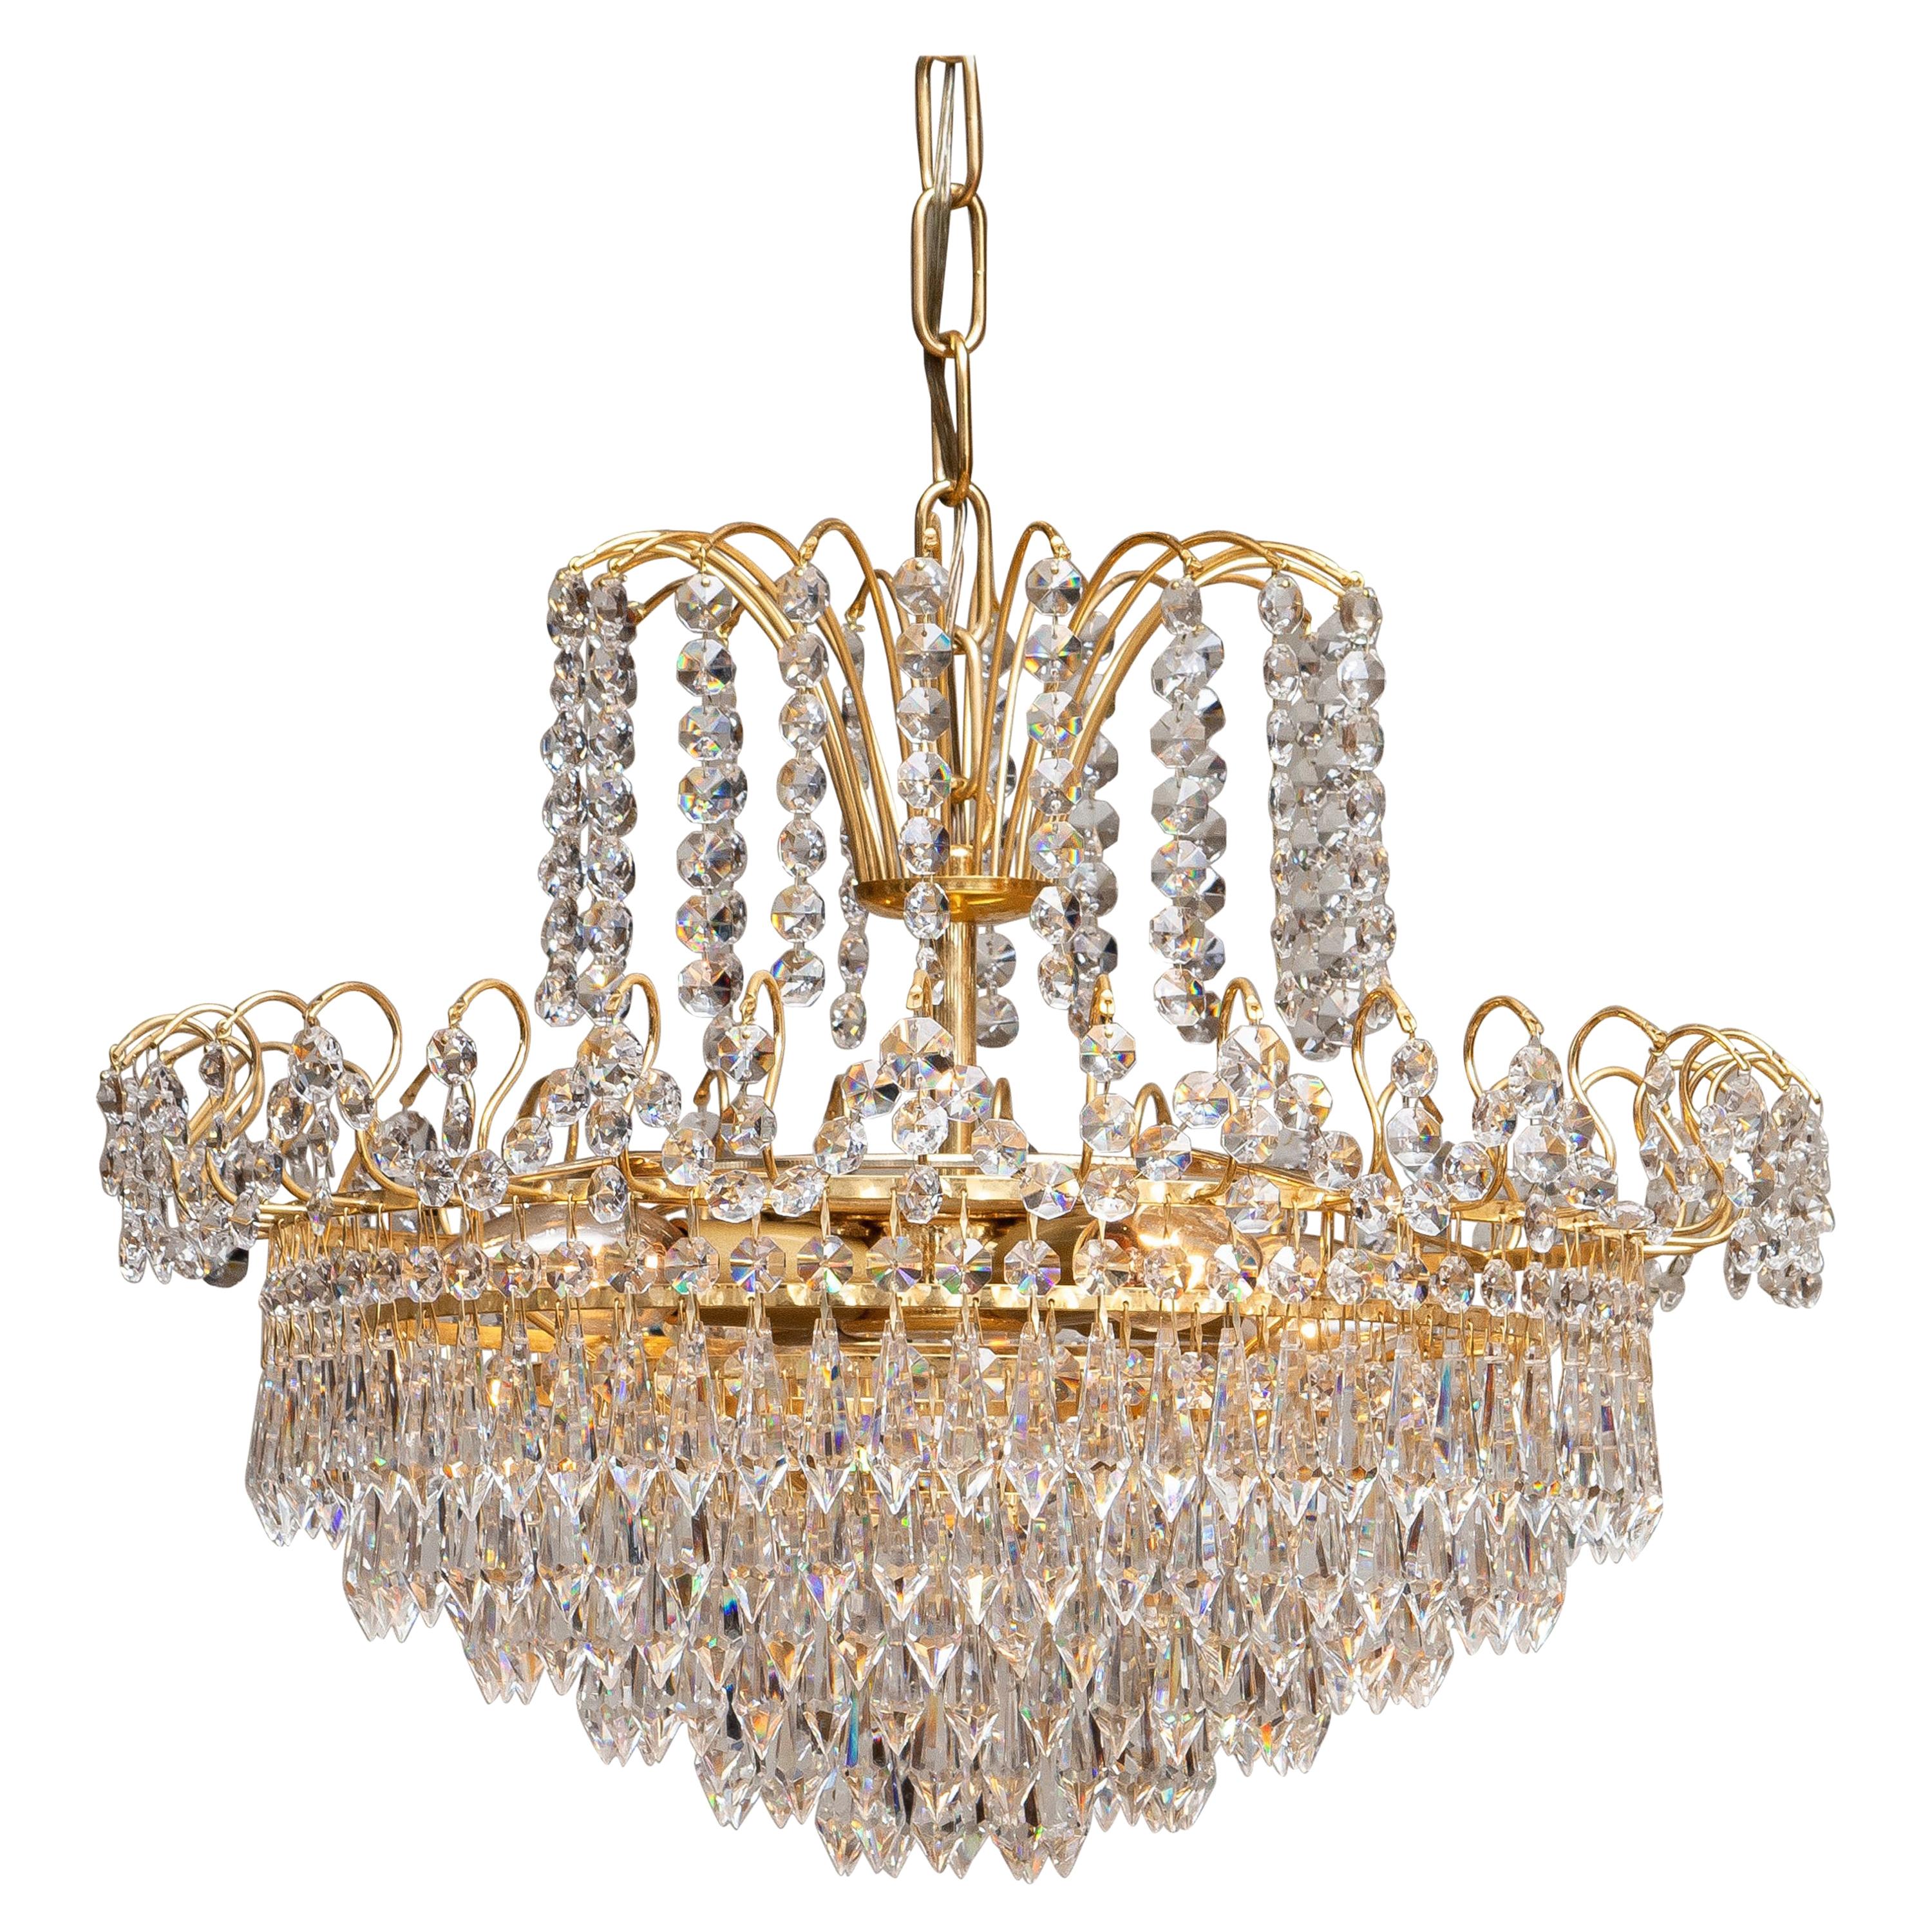 1970s, Gold-Plated and Faceted Crystal Chandelier Attributed to Rejmyre, Sweden